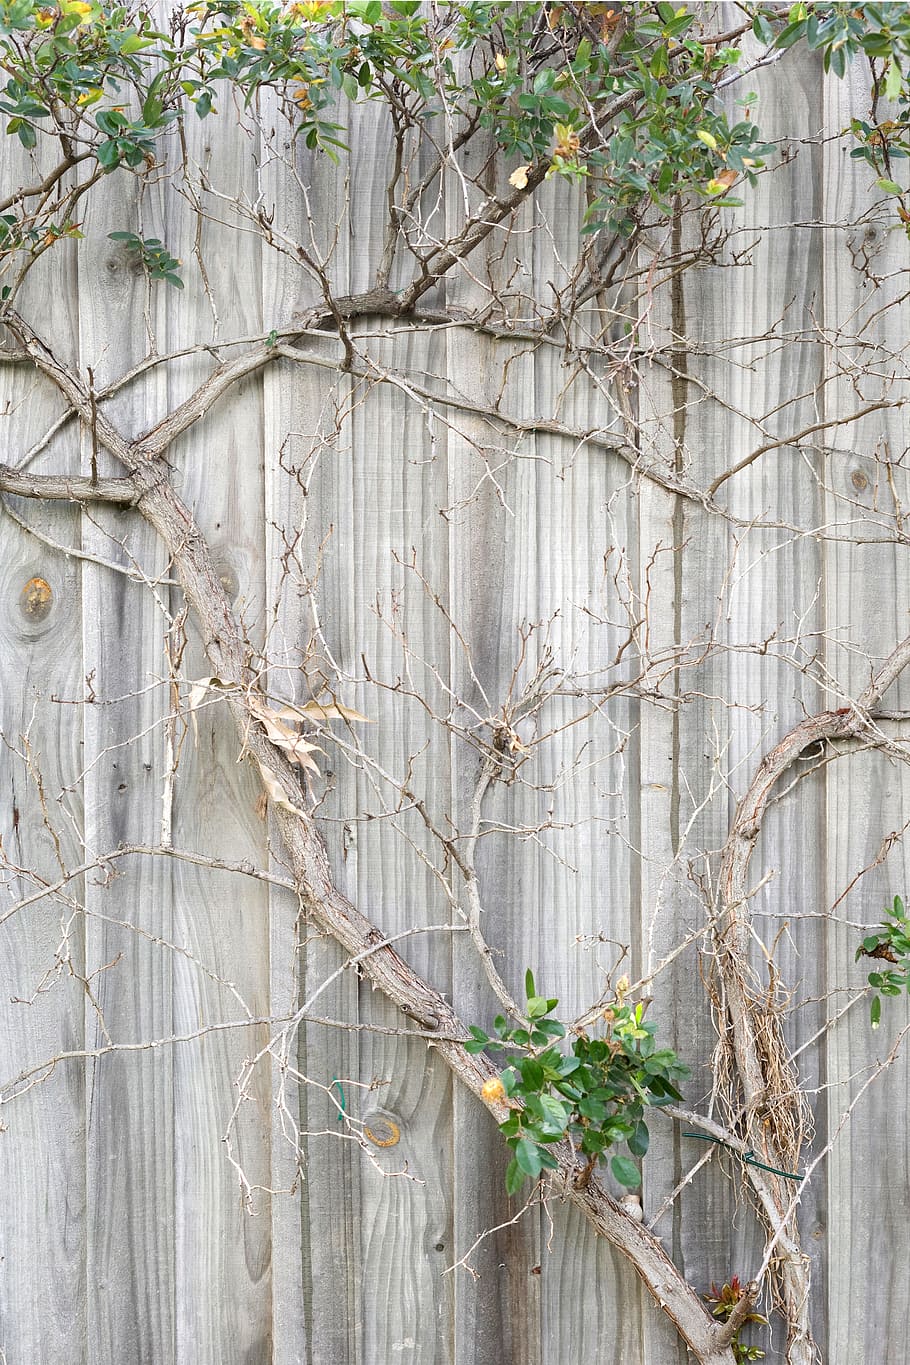 Fence, Wall, Plant, Branch, Tree, Wood, wall plant, palings, branches, nature